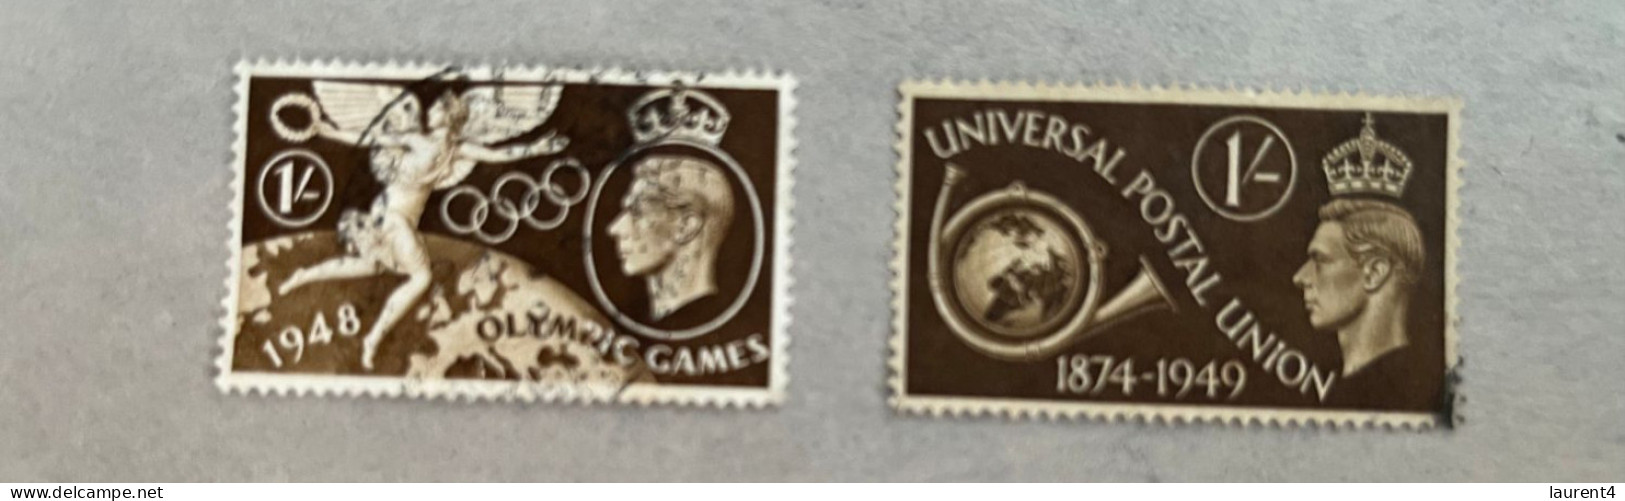 13-8-2023 (stamp) Selection Of 2 UK 1948 (higher Values) Olympic Used Stamps + UPU (1949) - Sommer 1948: London